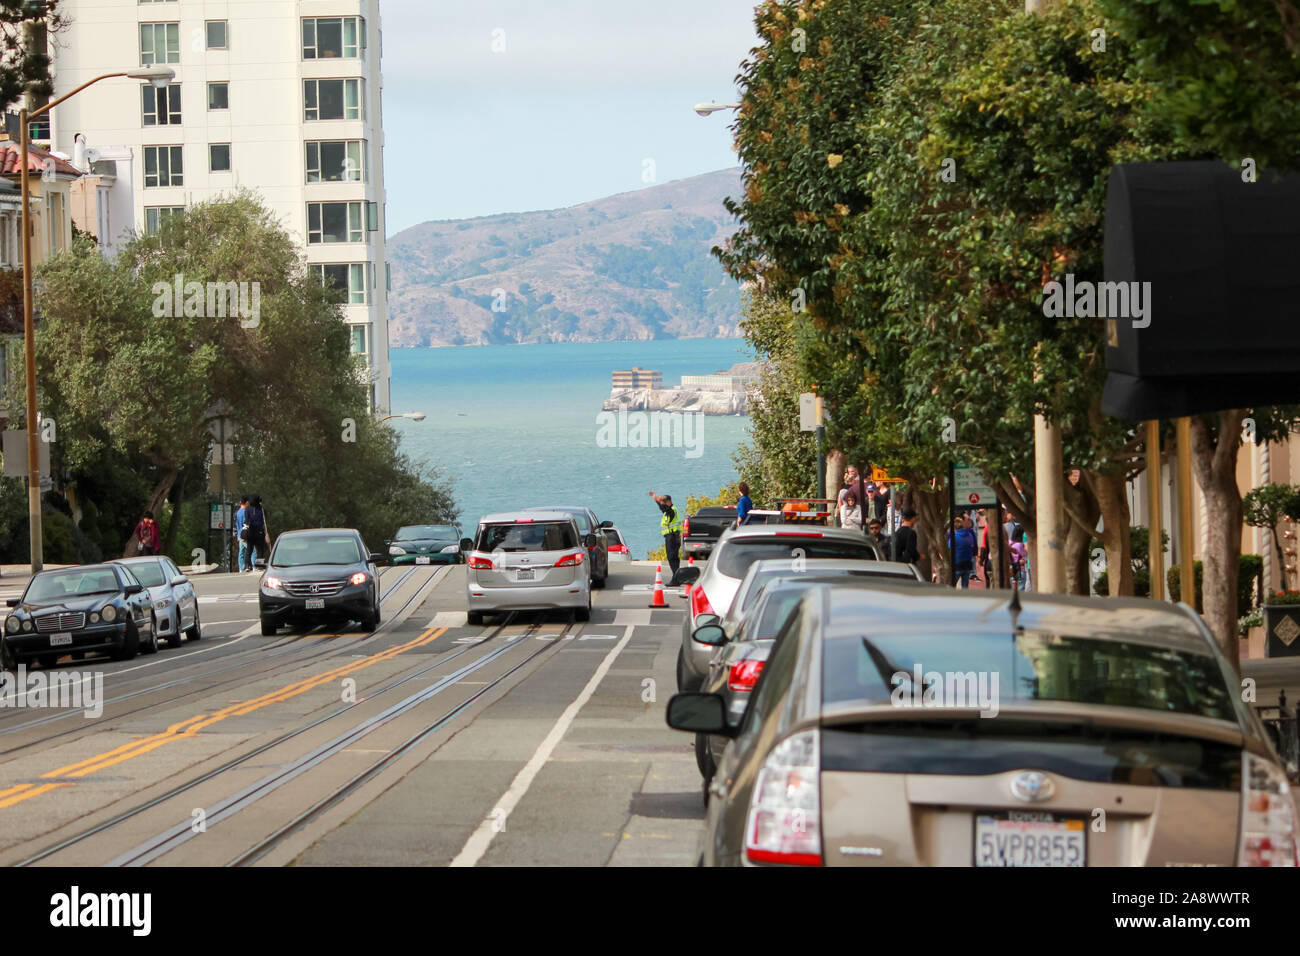 San Francisco, California / USA - September 20 2014: Scenic view of one of the downhill street in San Francisco city with background of the bay Stock Photo